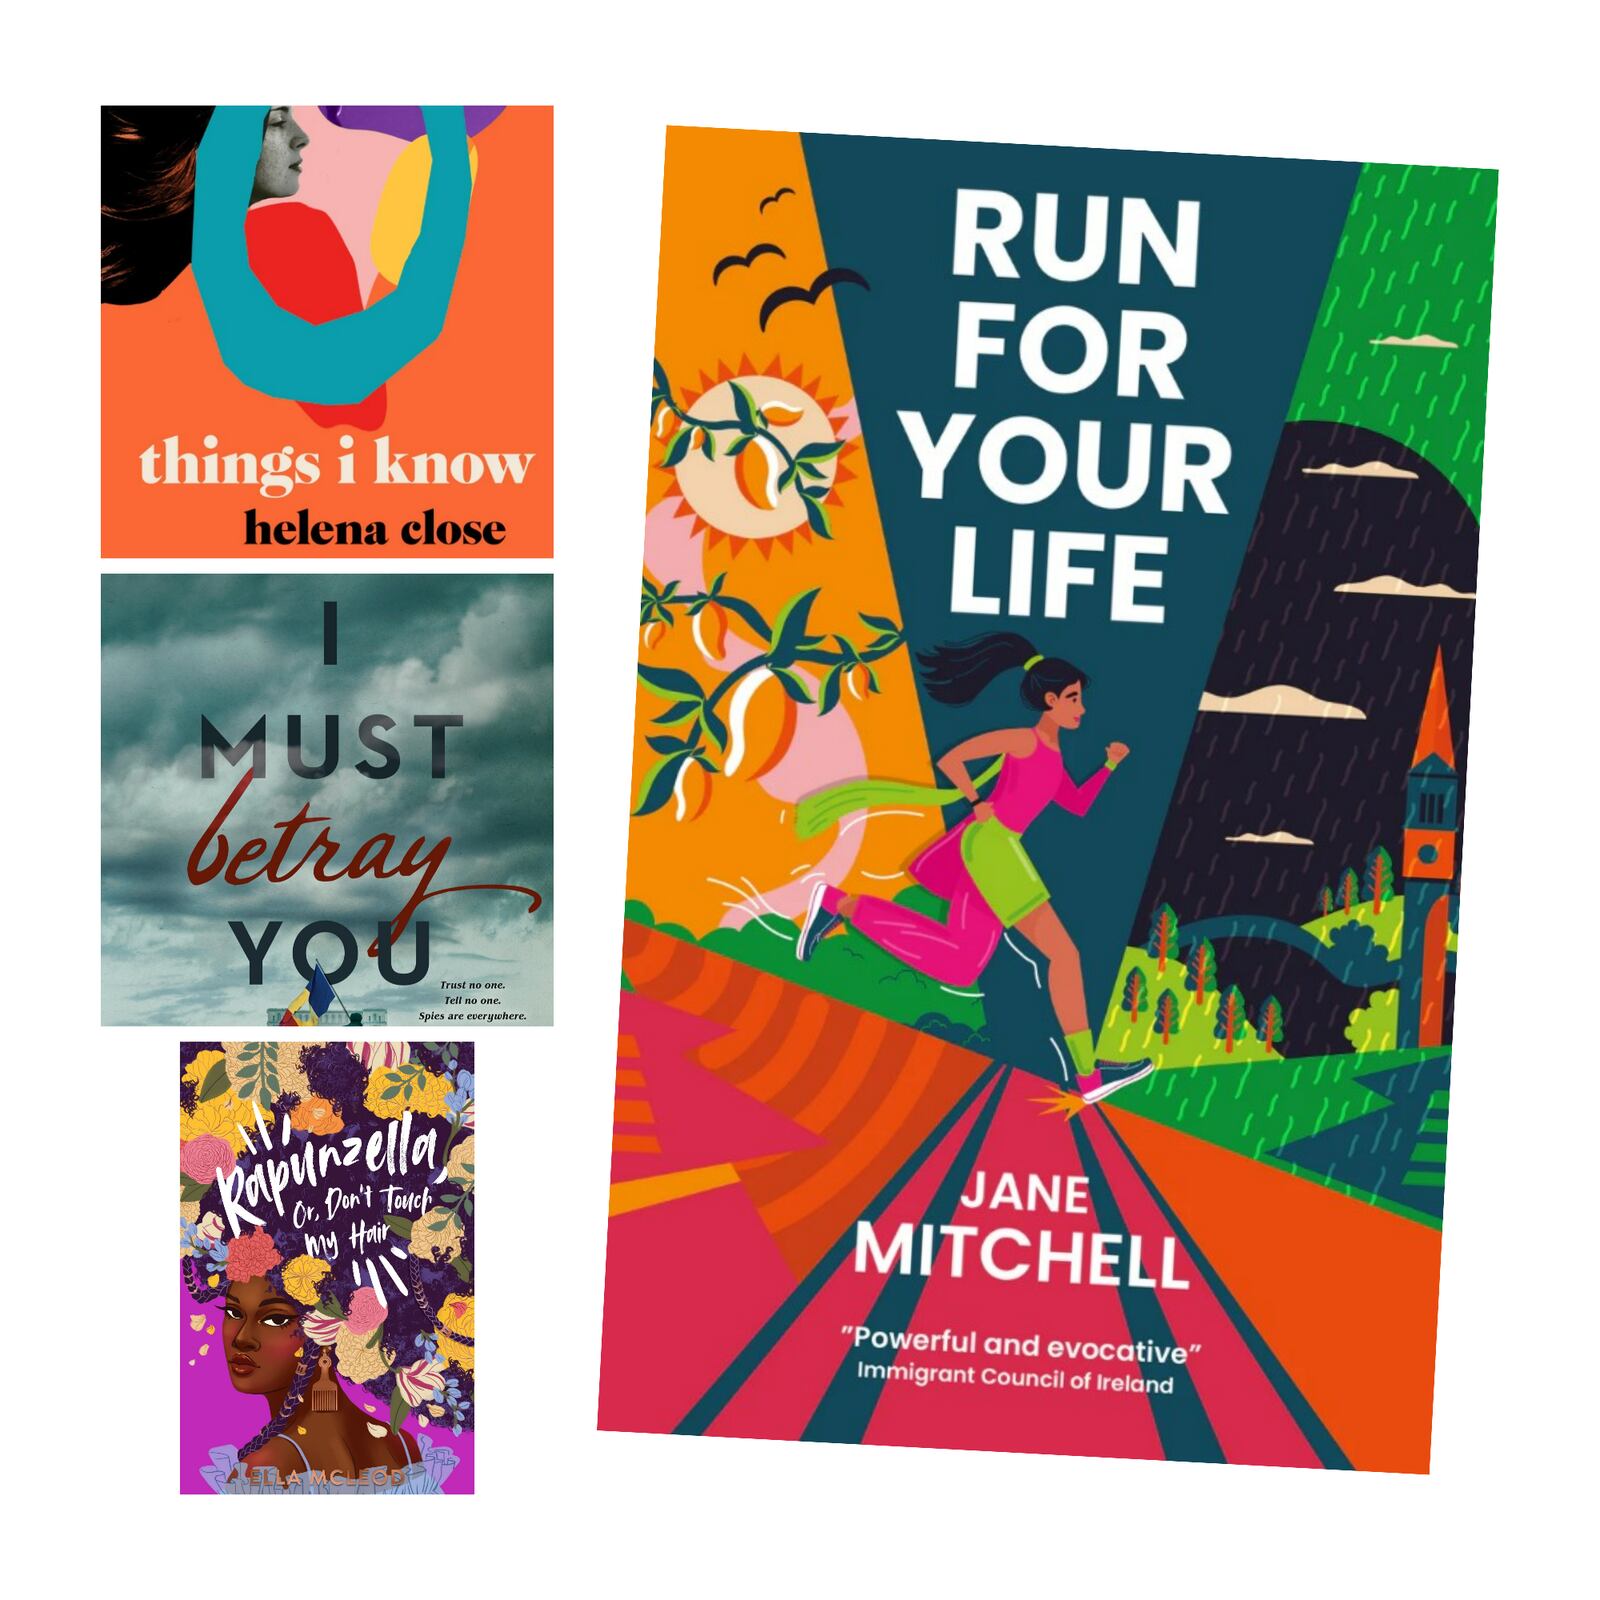 Books of the year 2022 - young adult: Things I Know, I must Betray You, Rapunzella and Run for Your Life